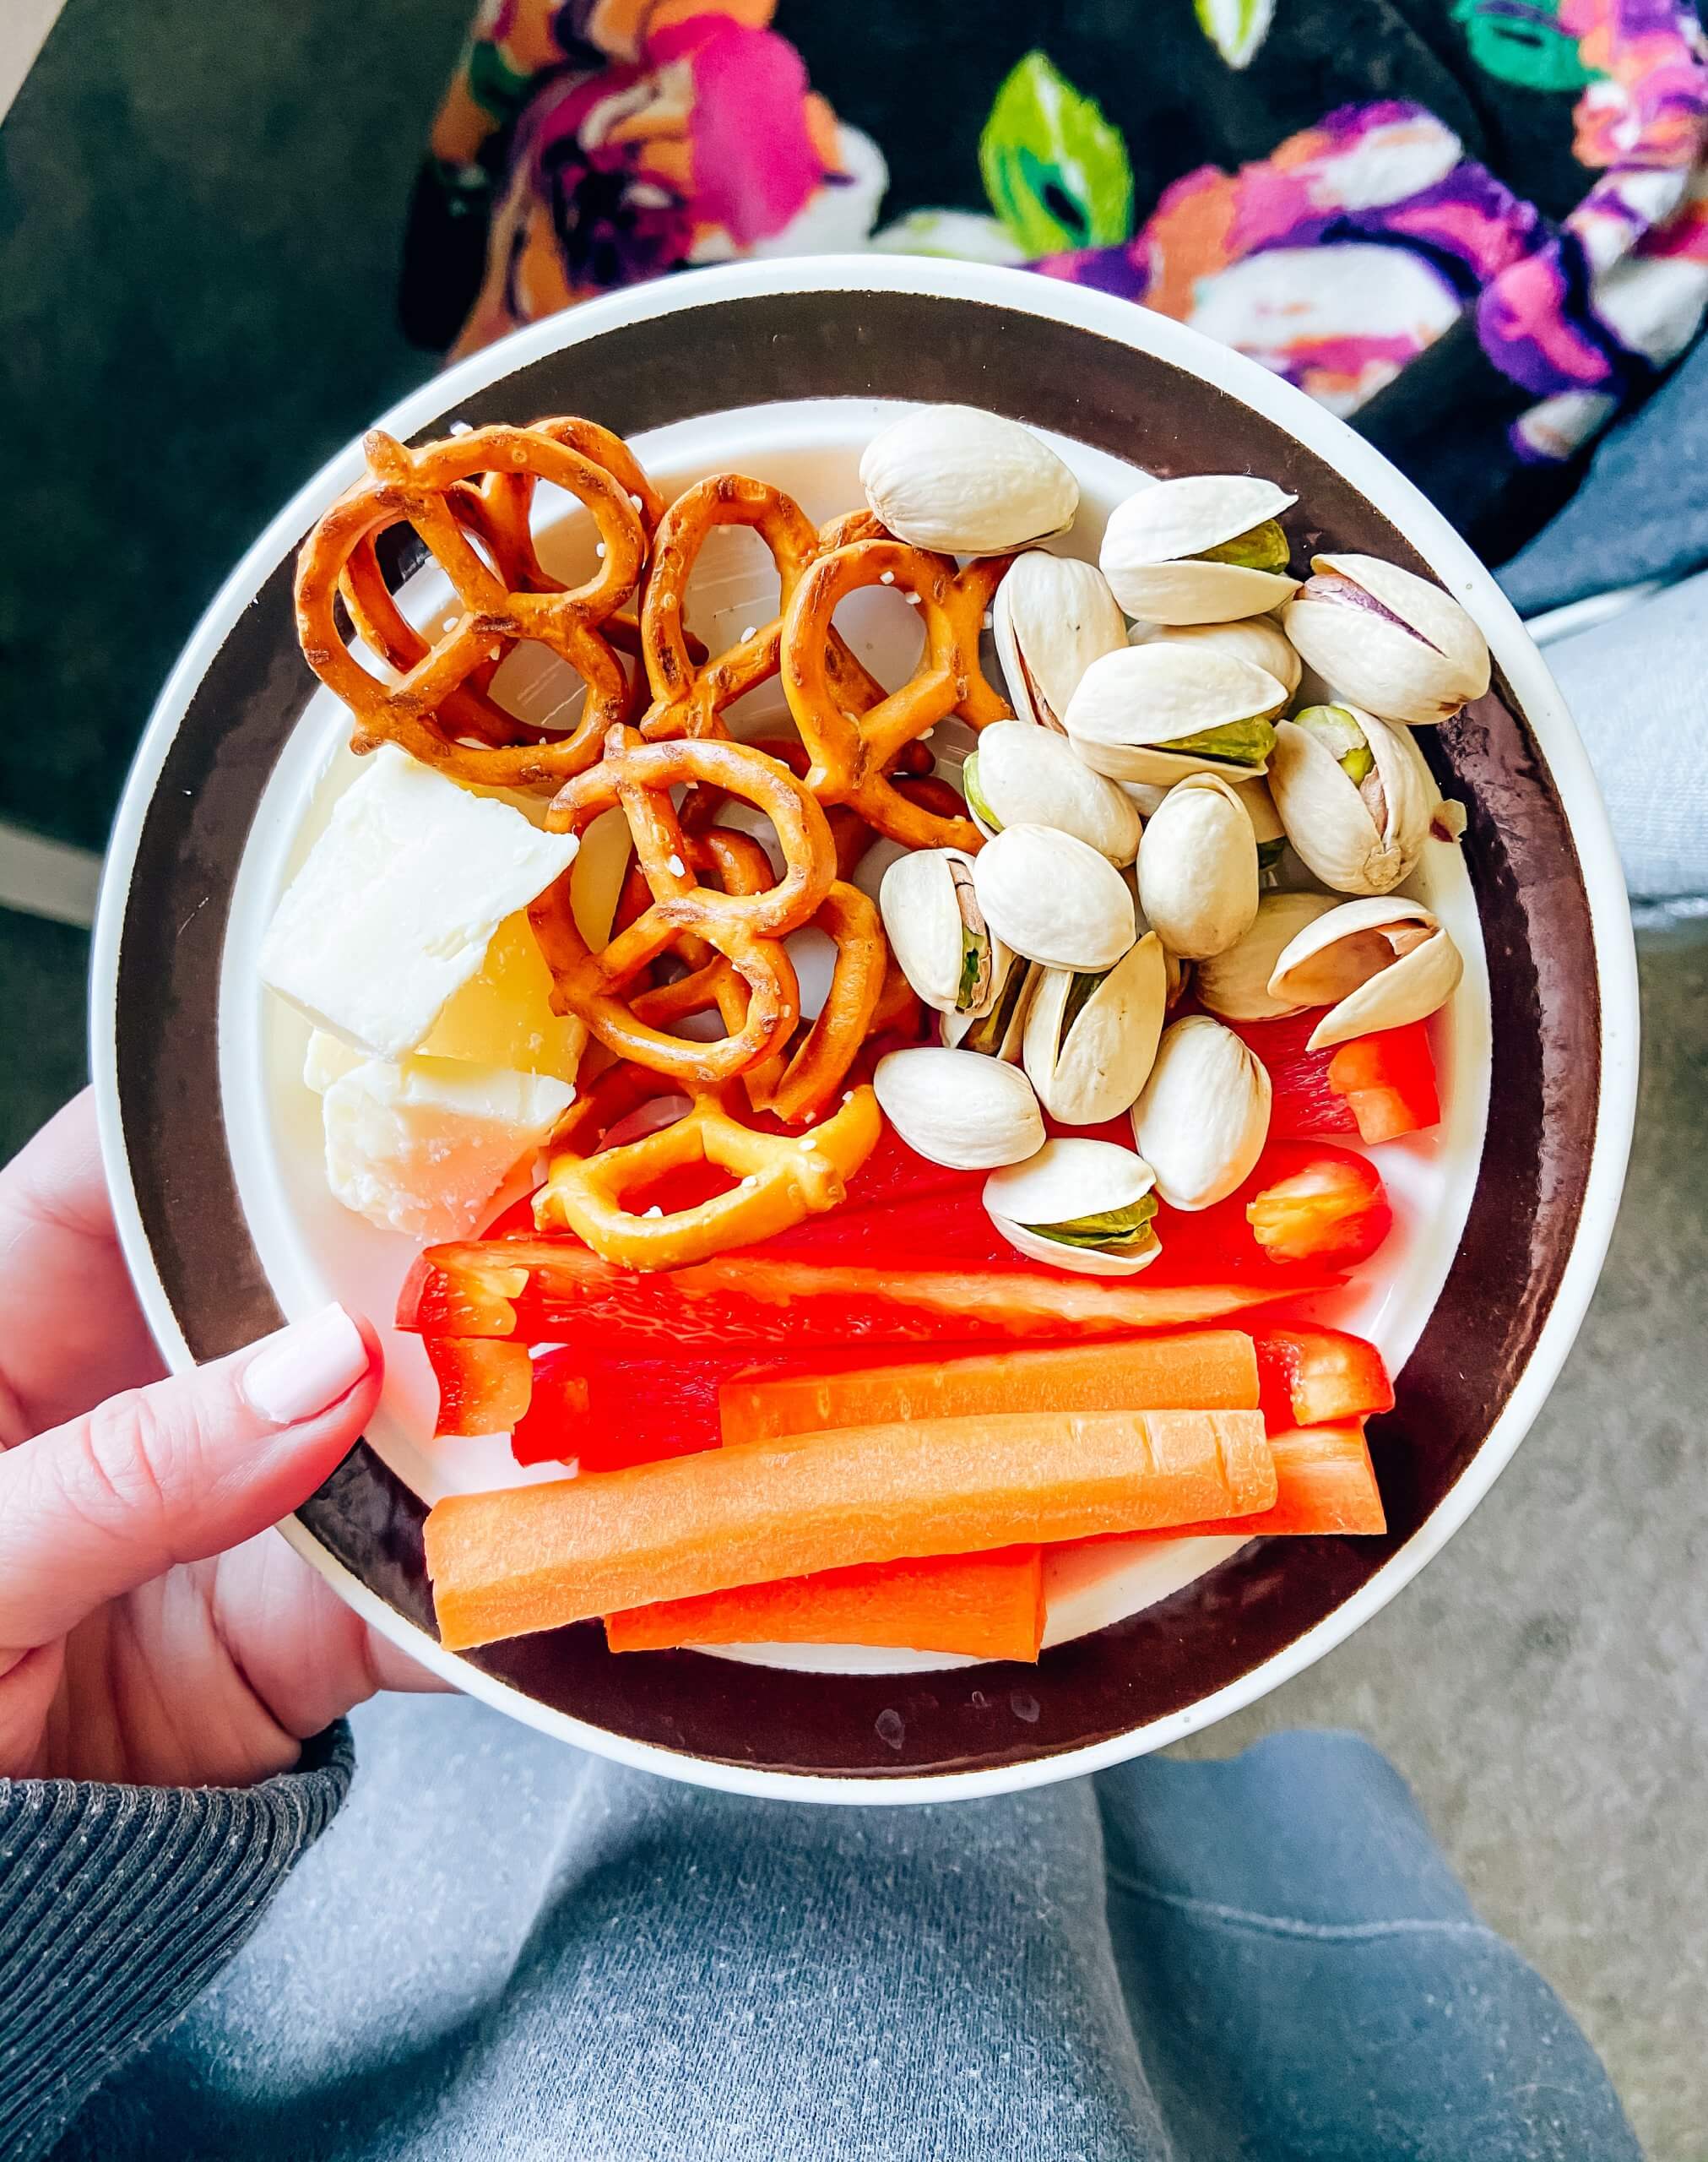 Dietitian-Approved Healthy Snacks